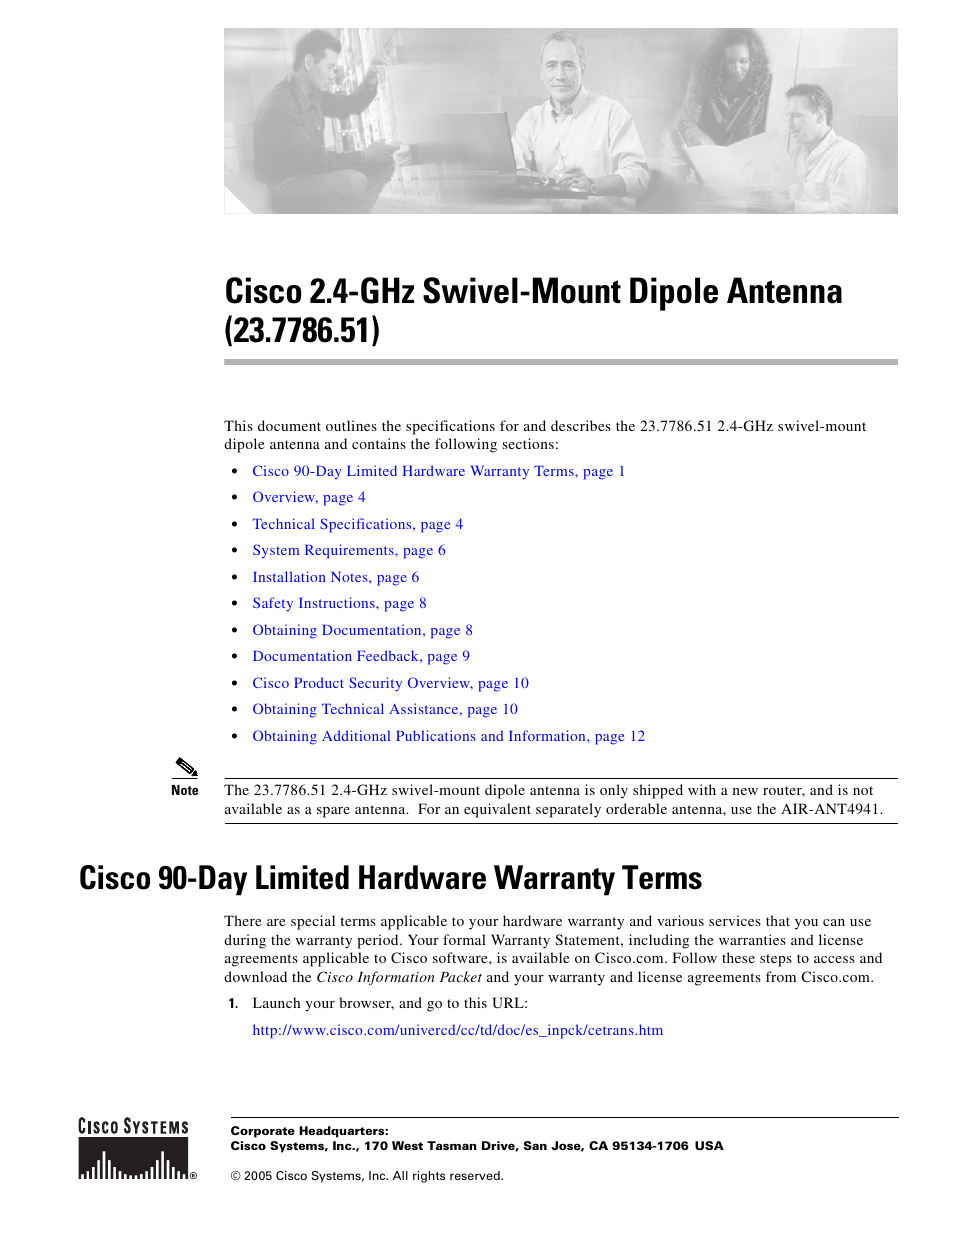 Cisco Cisco 2.4-GHz Swivel-Mount Dipole Antenna 23.7786.51 User Manual | 14 pages